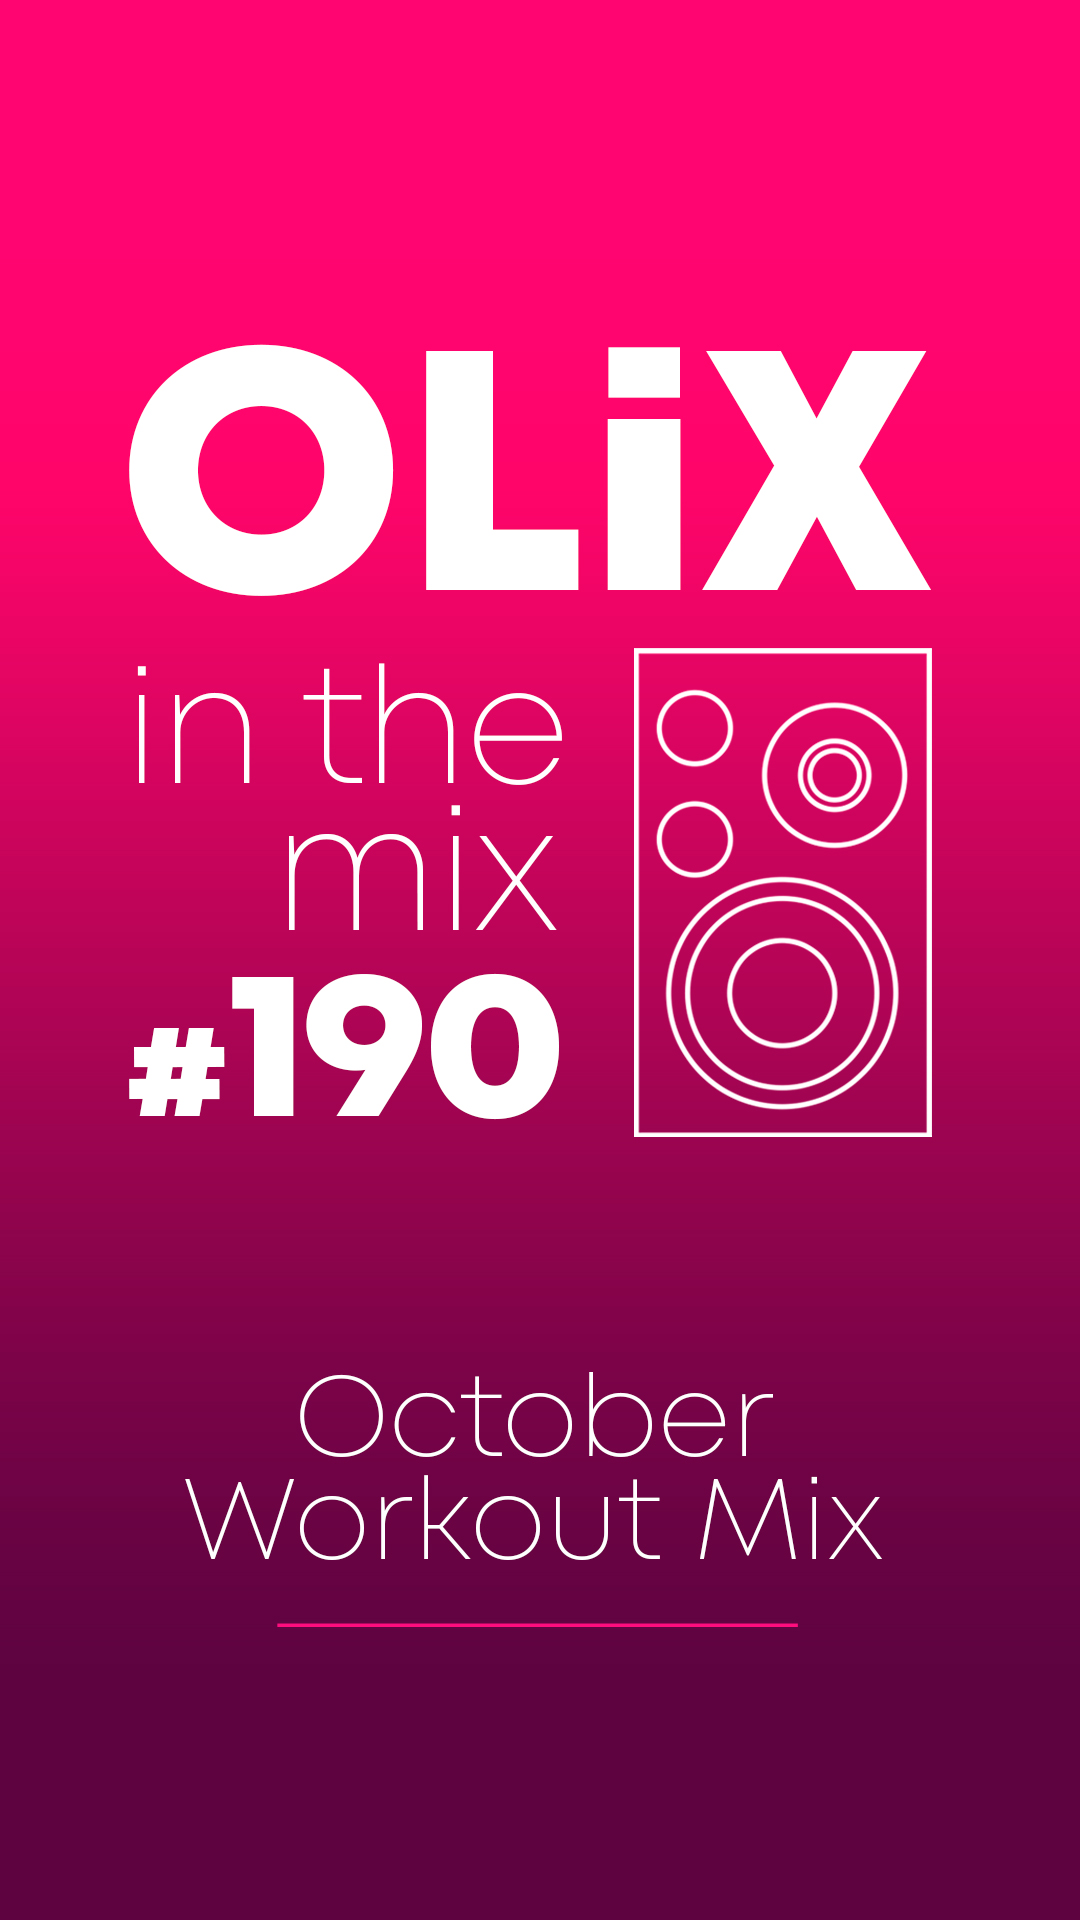 OLiX in the Mix - 190 - October Wourkout Mix